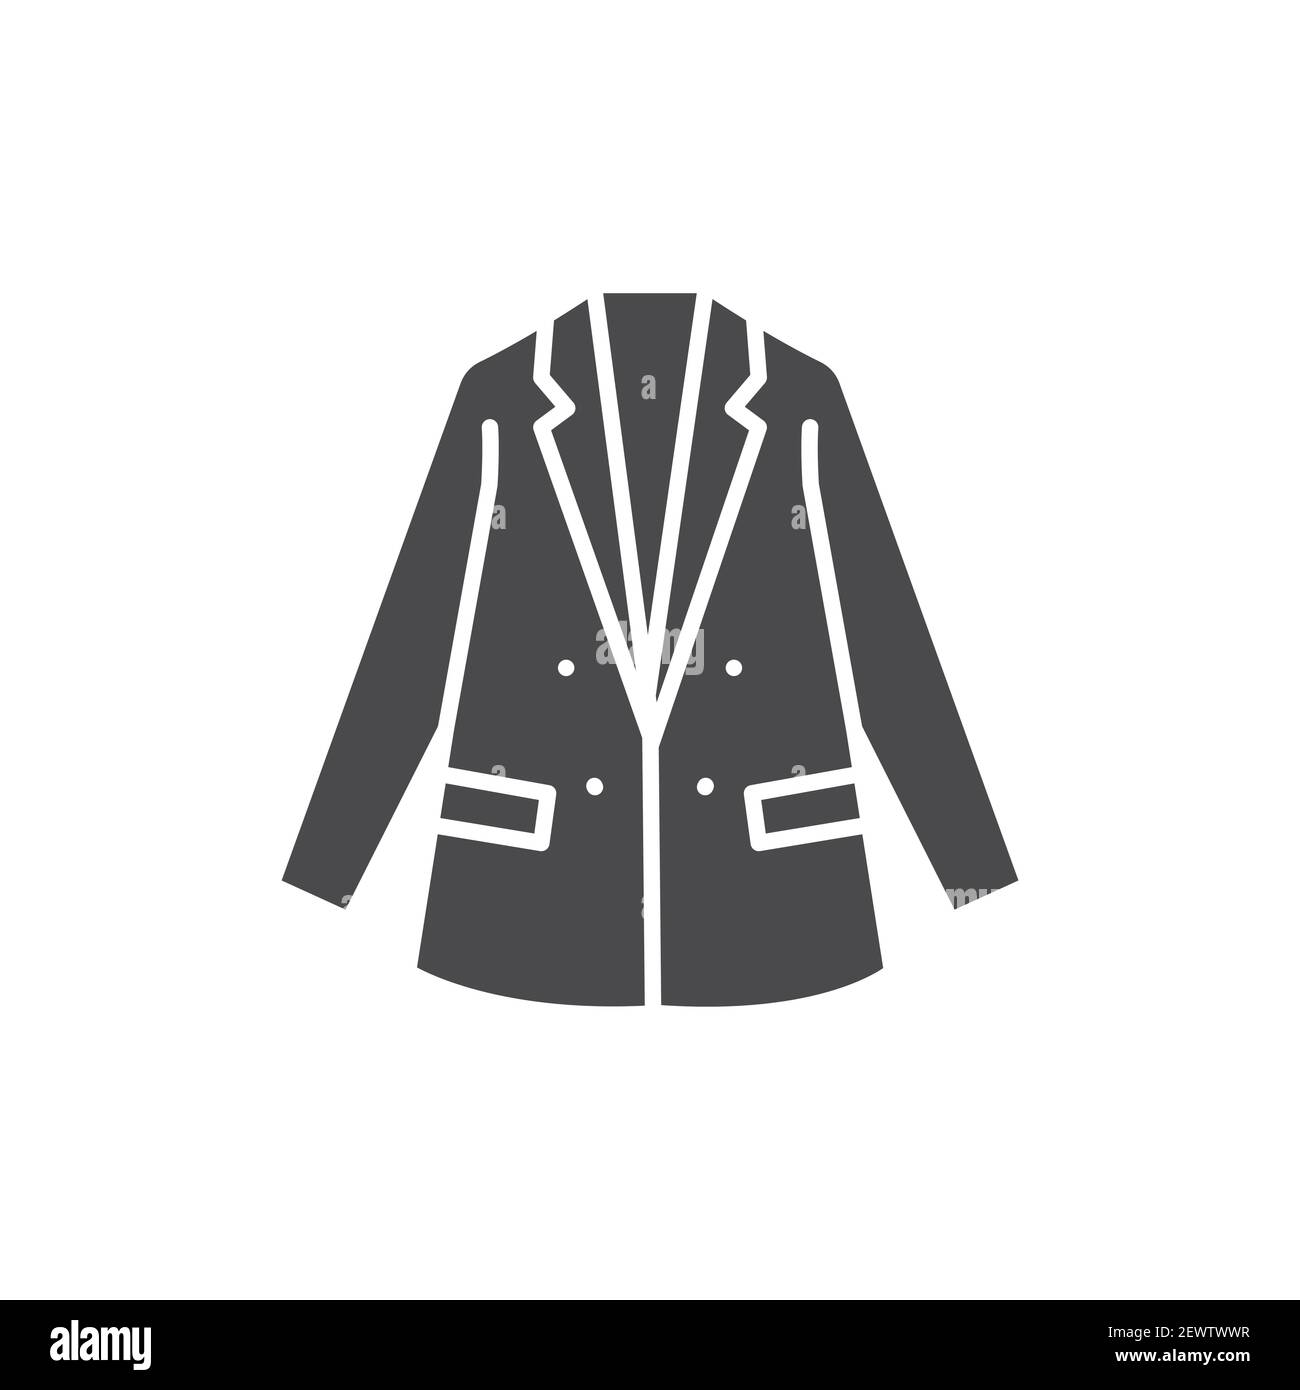 Blazer Vector Vectors High Resolution Stock Photography and Images - Alamy